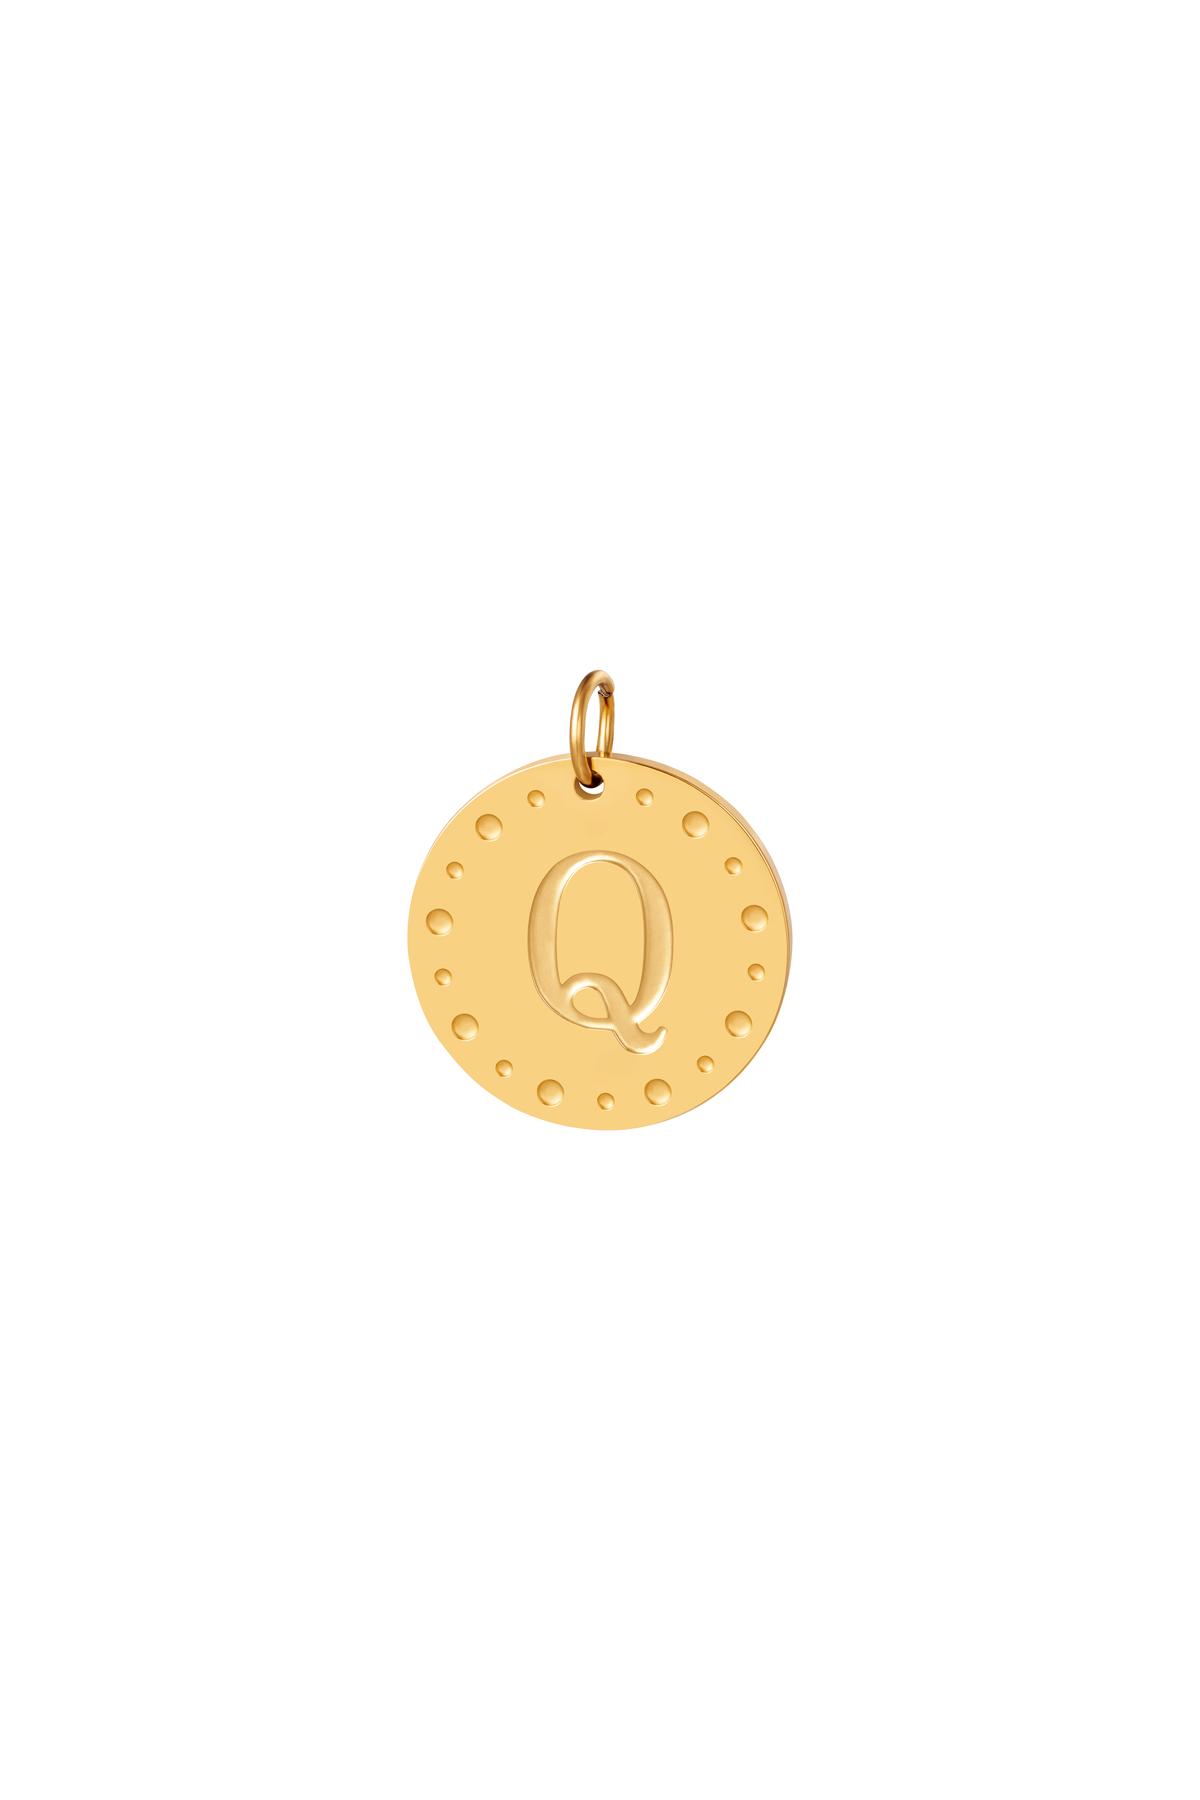 Charm cercle initial Q Or Acier inoxydable 